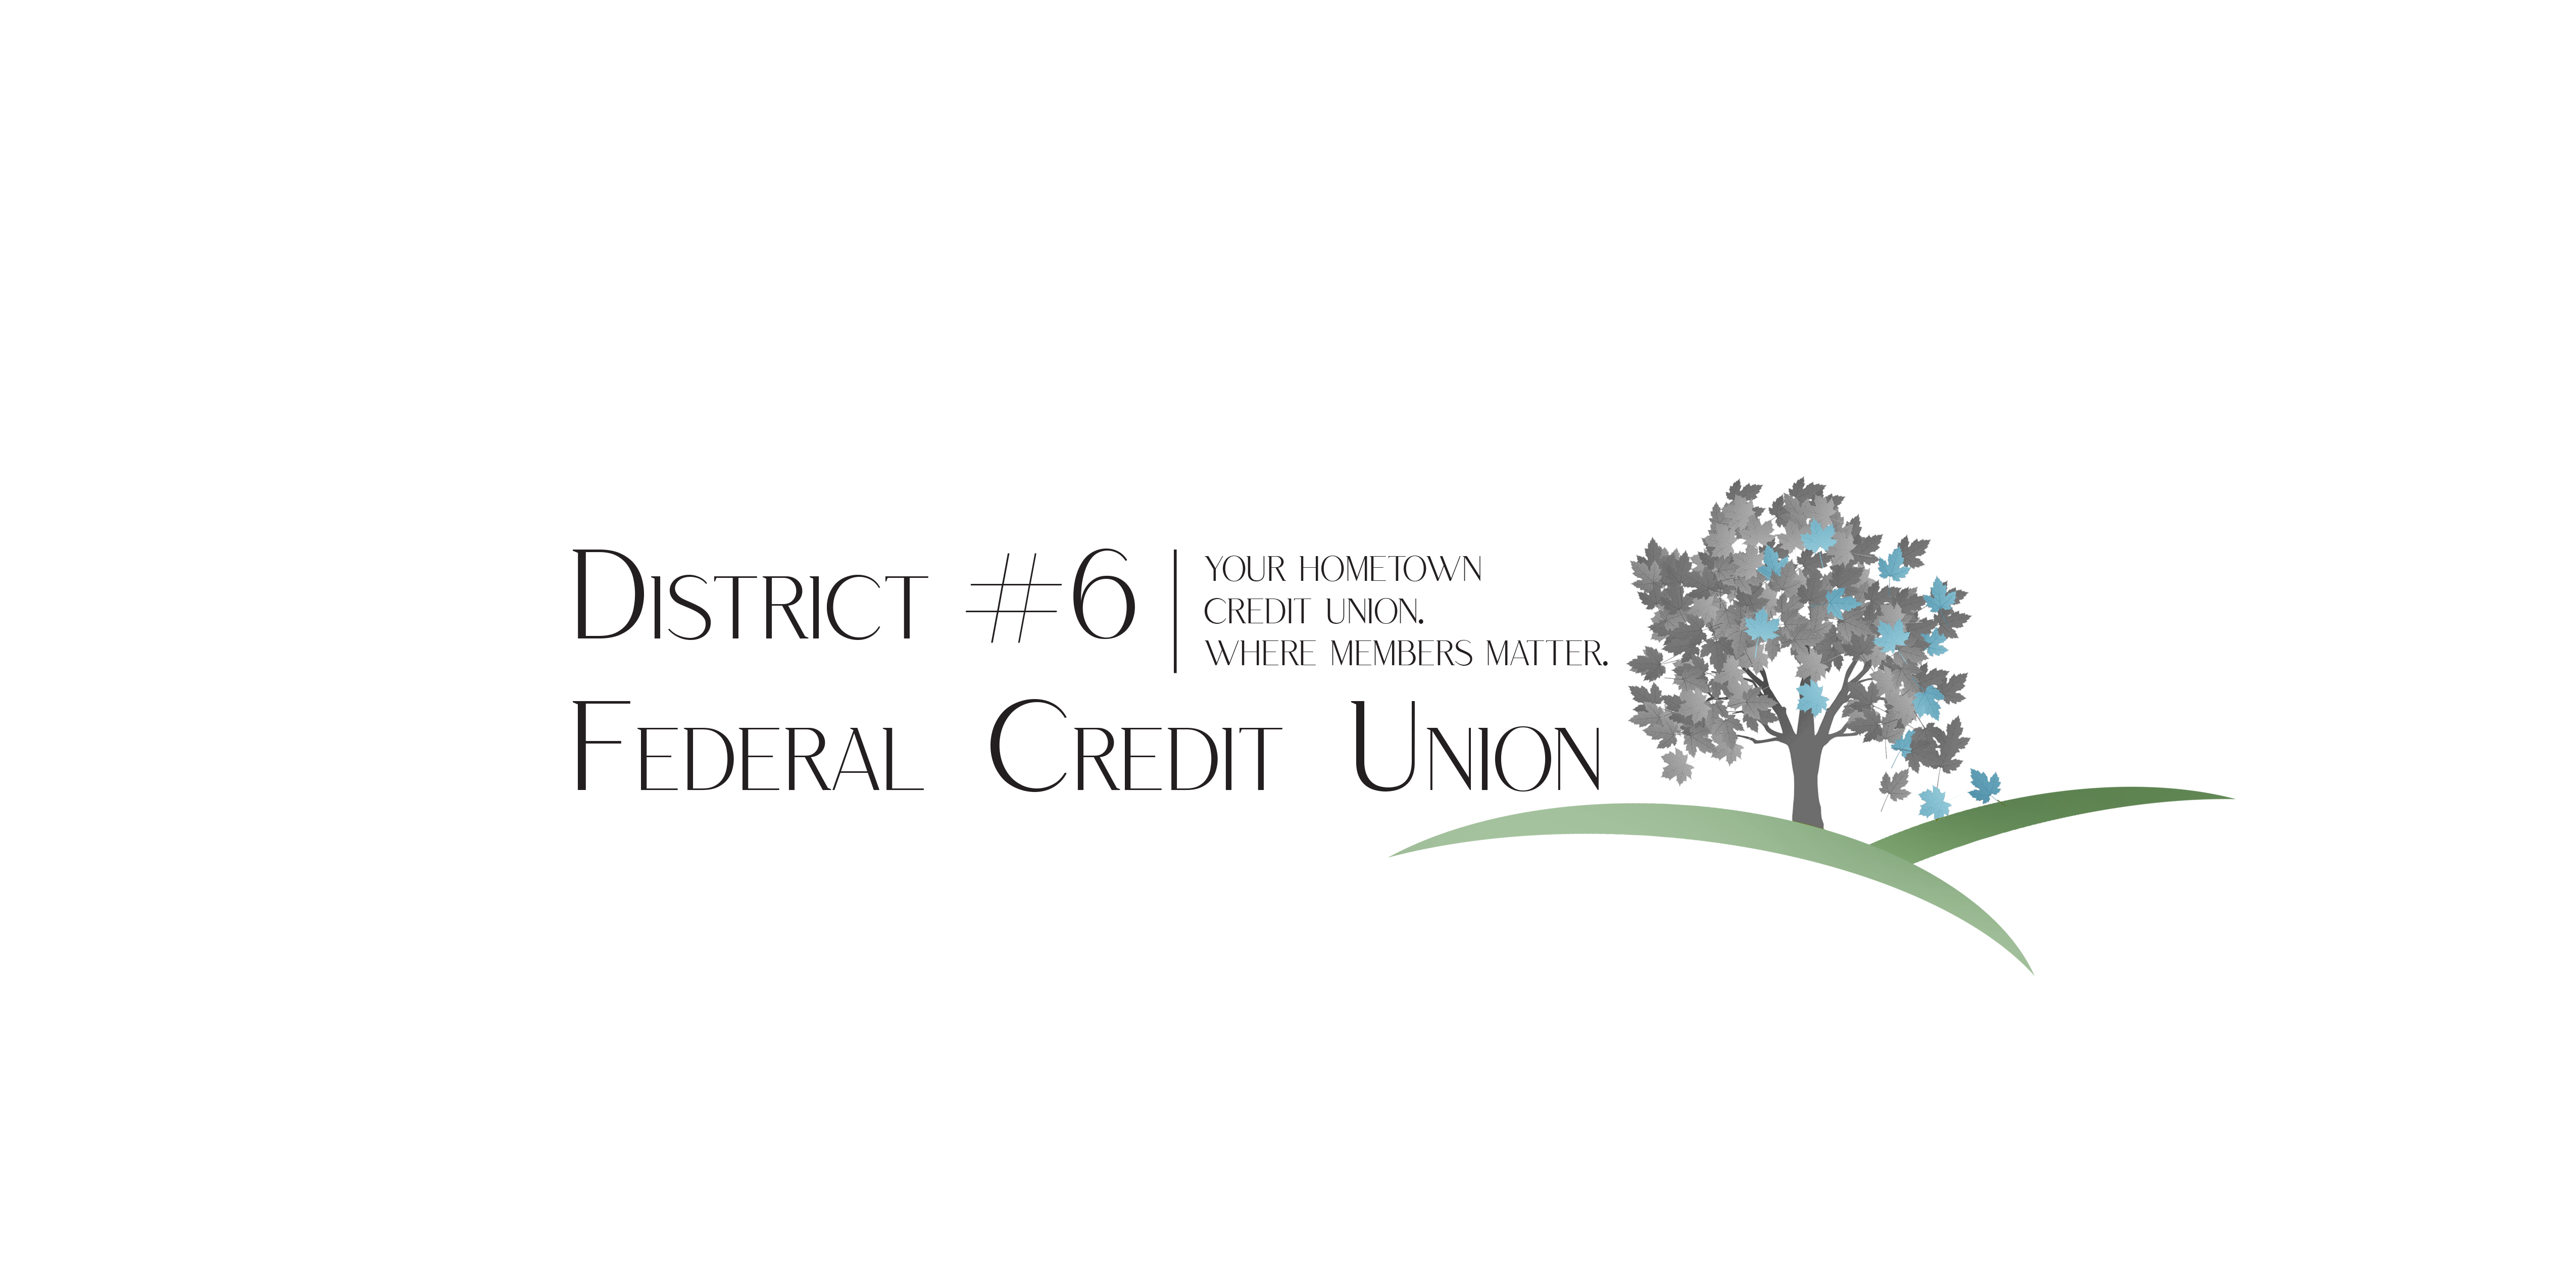 District #6 Federal Credit Union